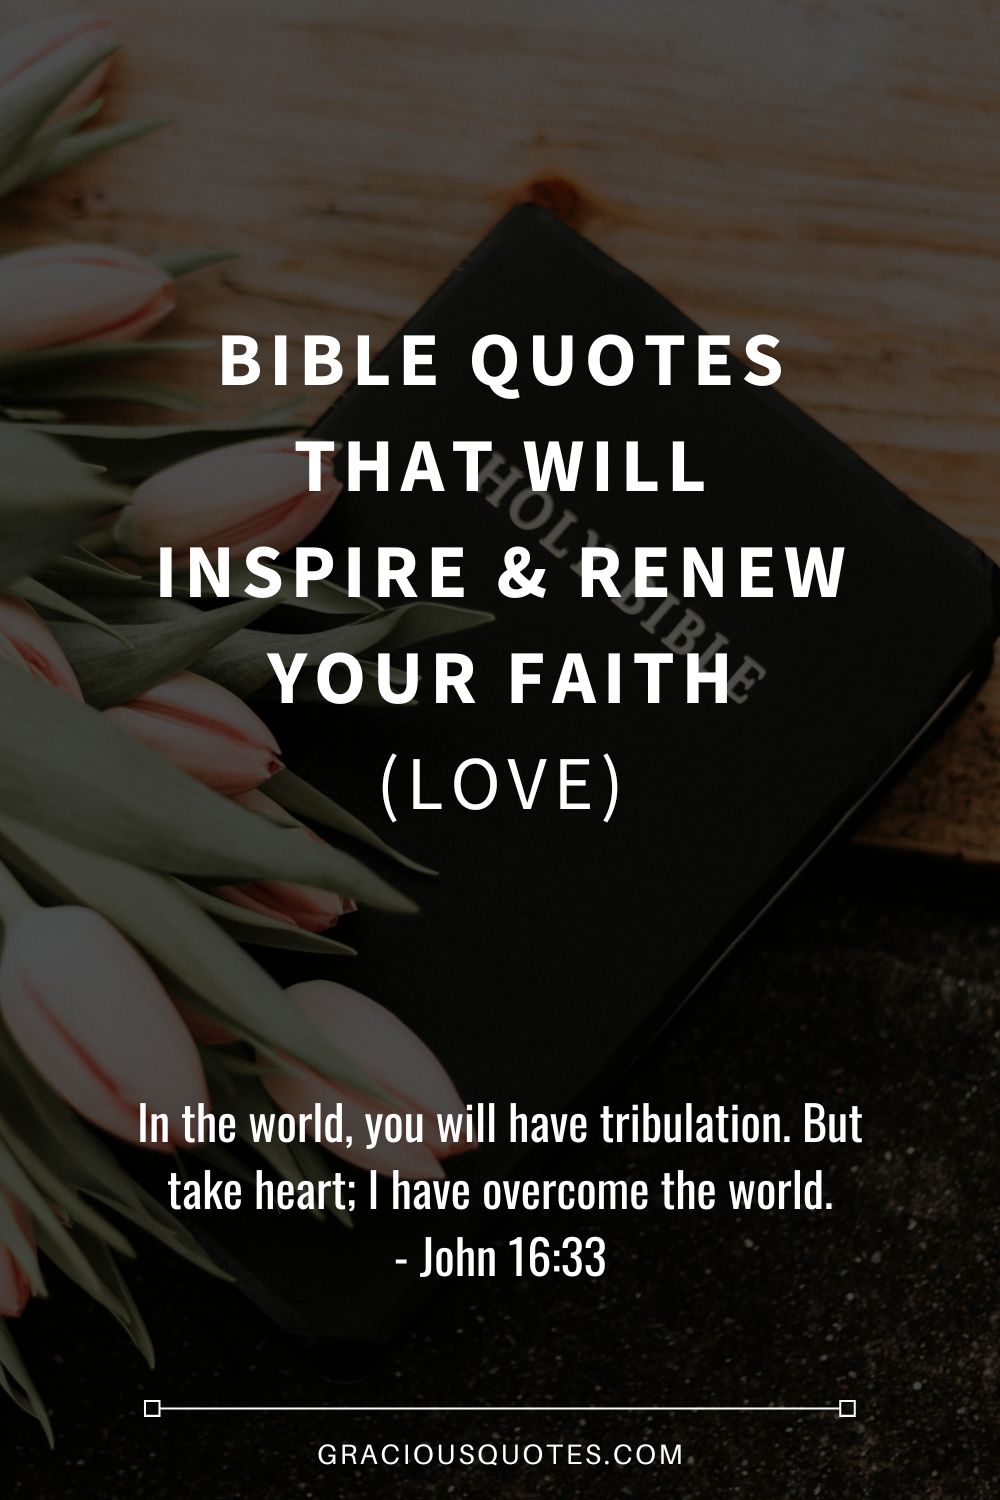 Bible Quotes That Will Inspire & Renew Your Faith (LOVE) - Gracious Quotes